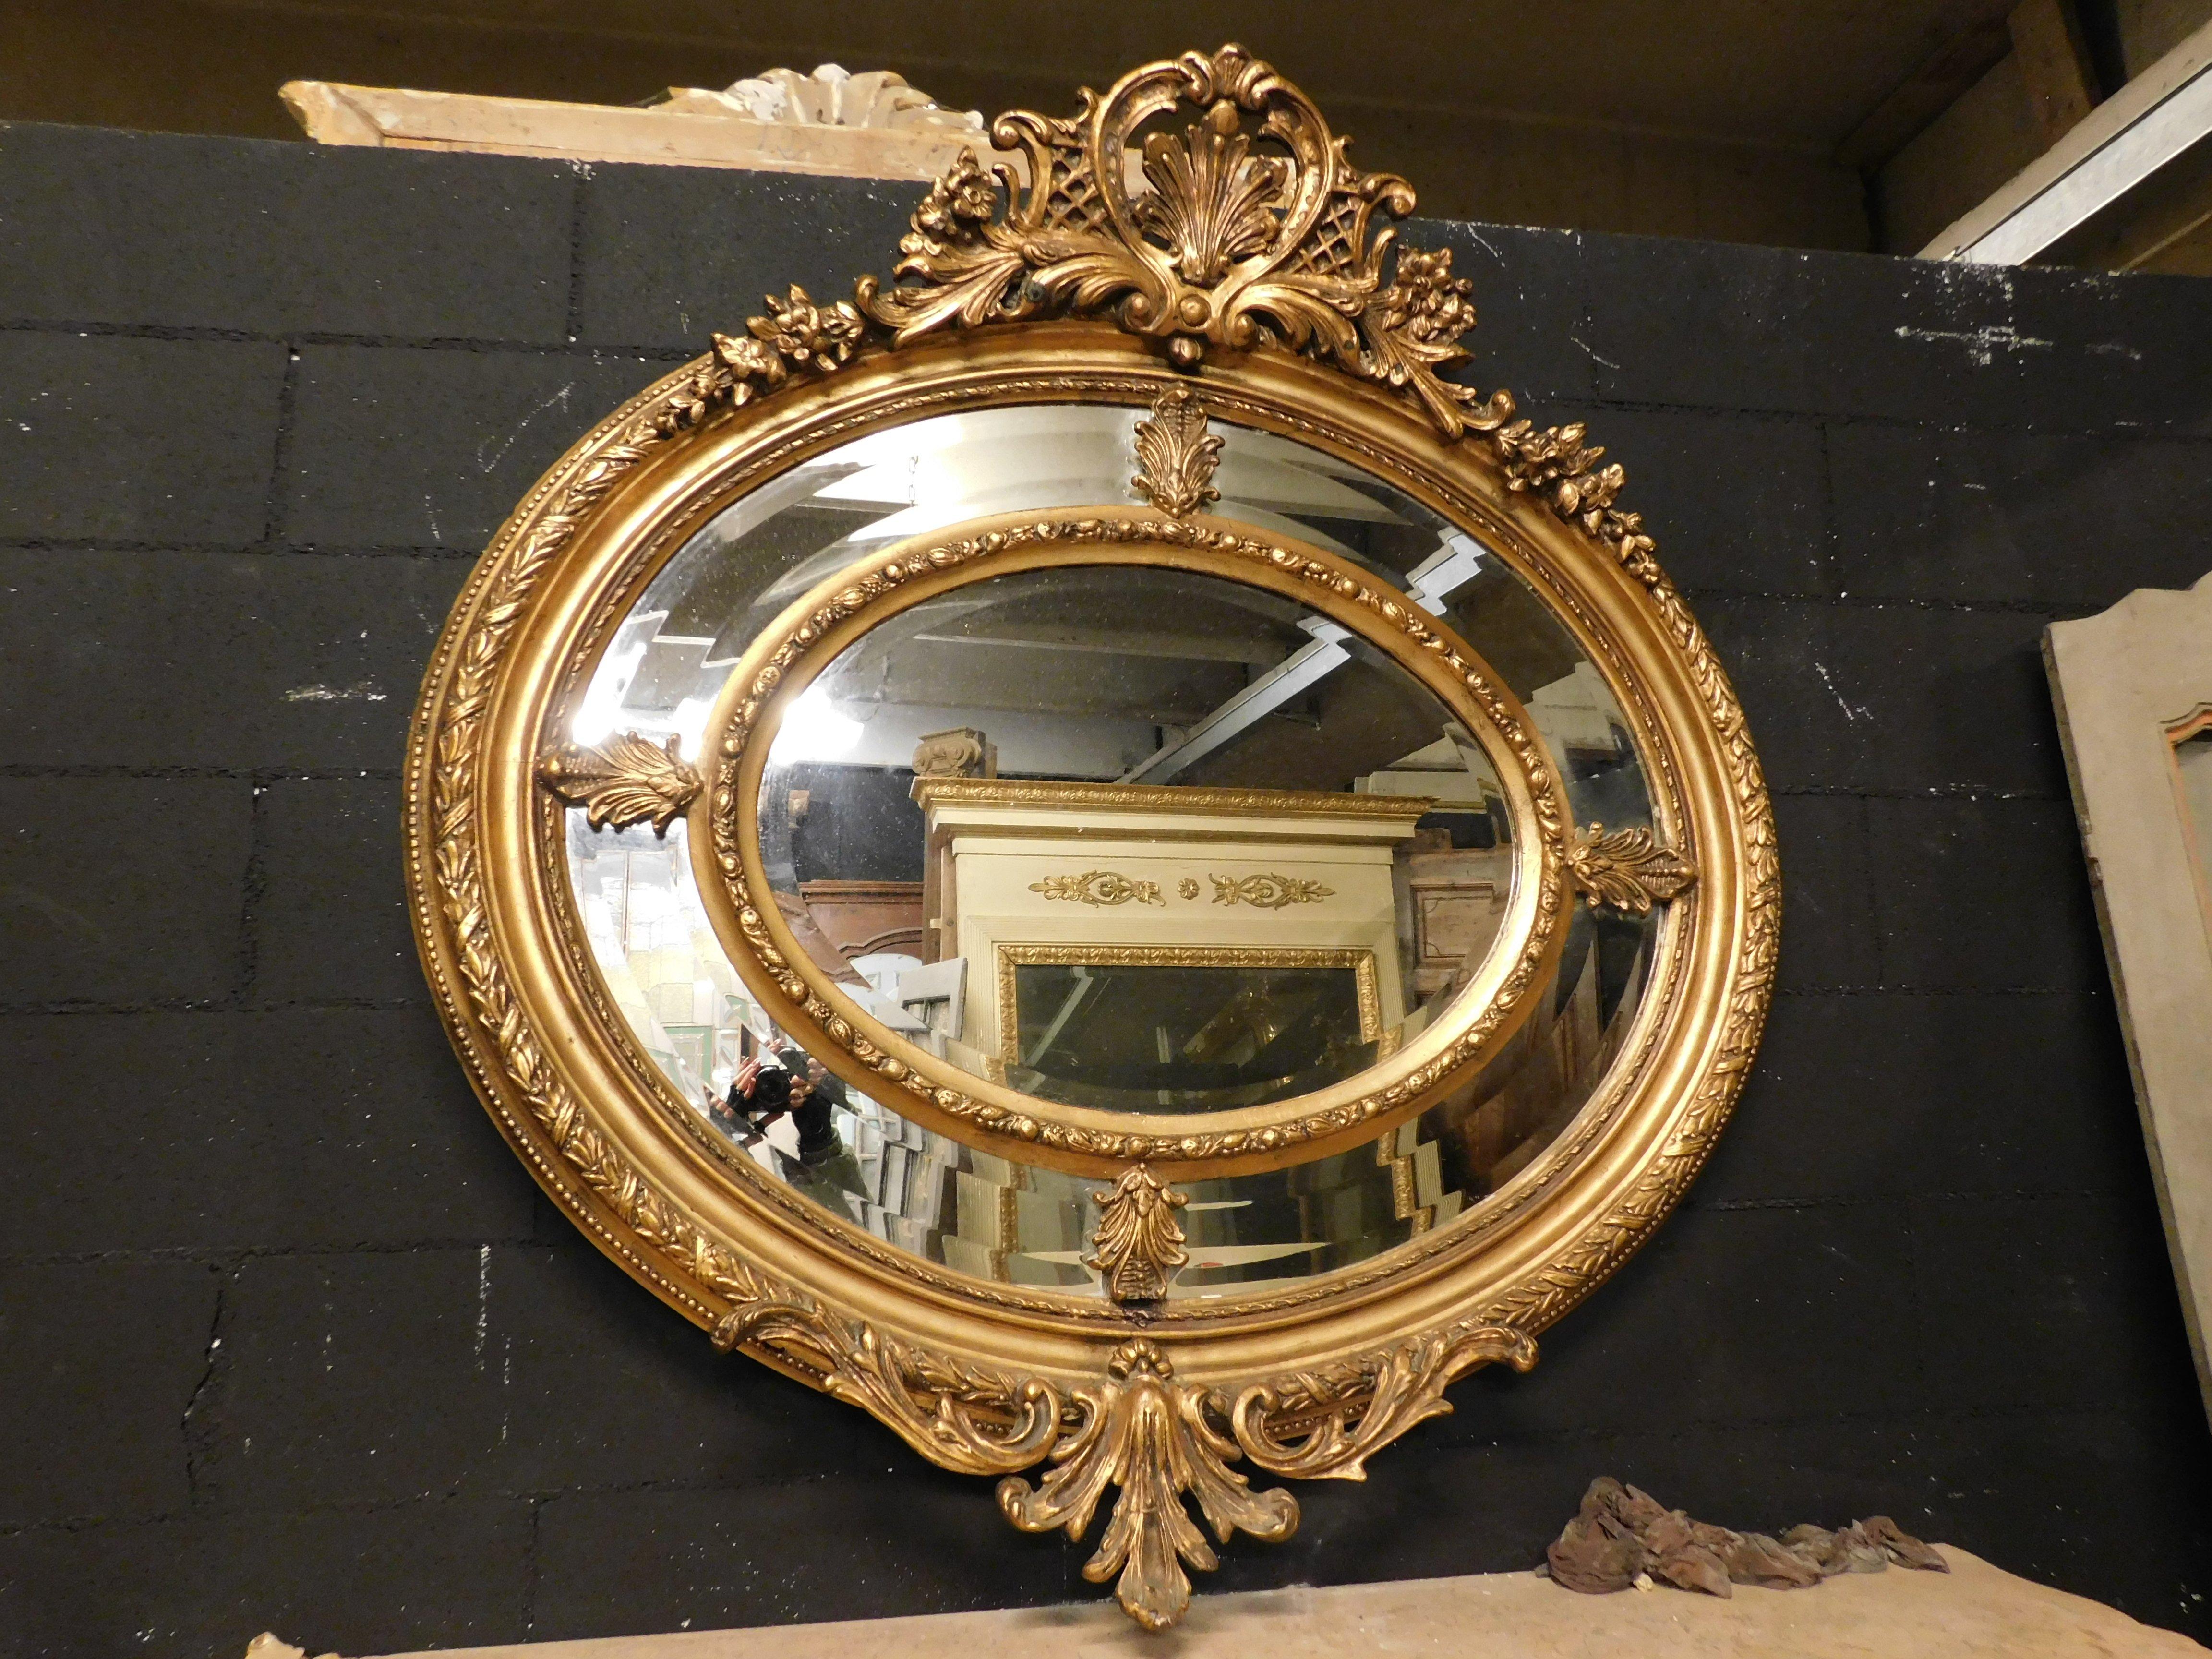 Antique wall mirror in gilded and richly carved wood, oval shape with carved and protruding cornices, built in France in the 19th century, particular double row of mirrors and frames, maximum external measurement cm w 125 x H 130.
​